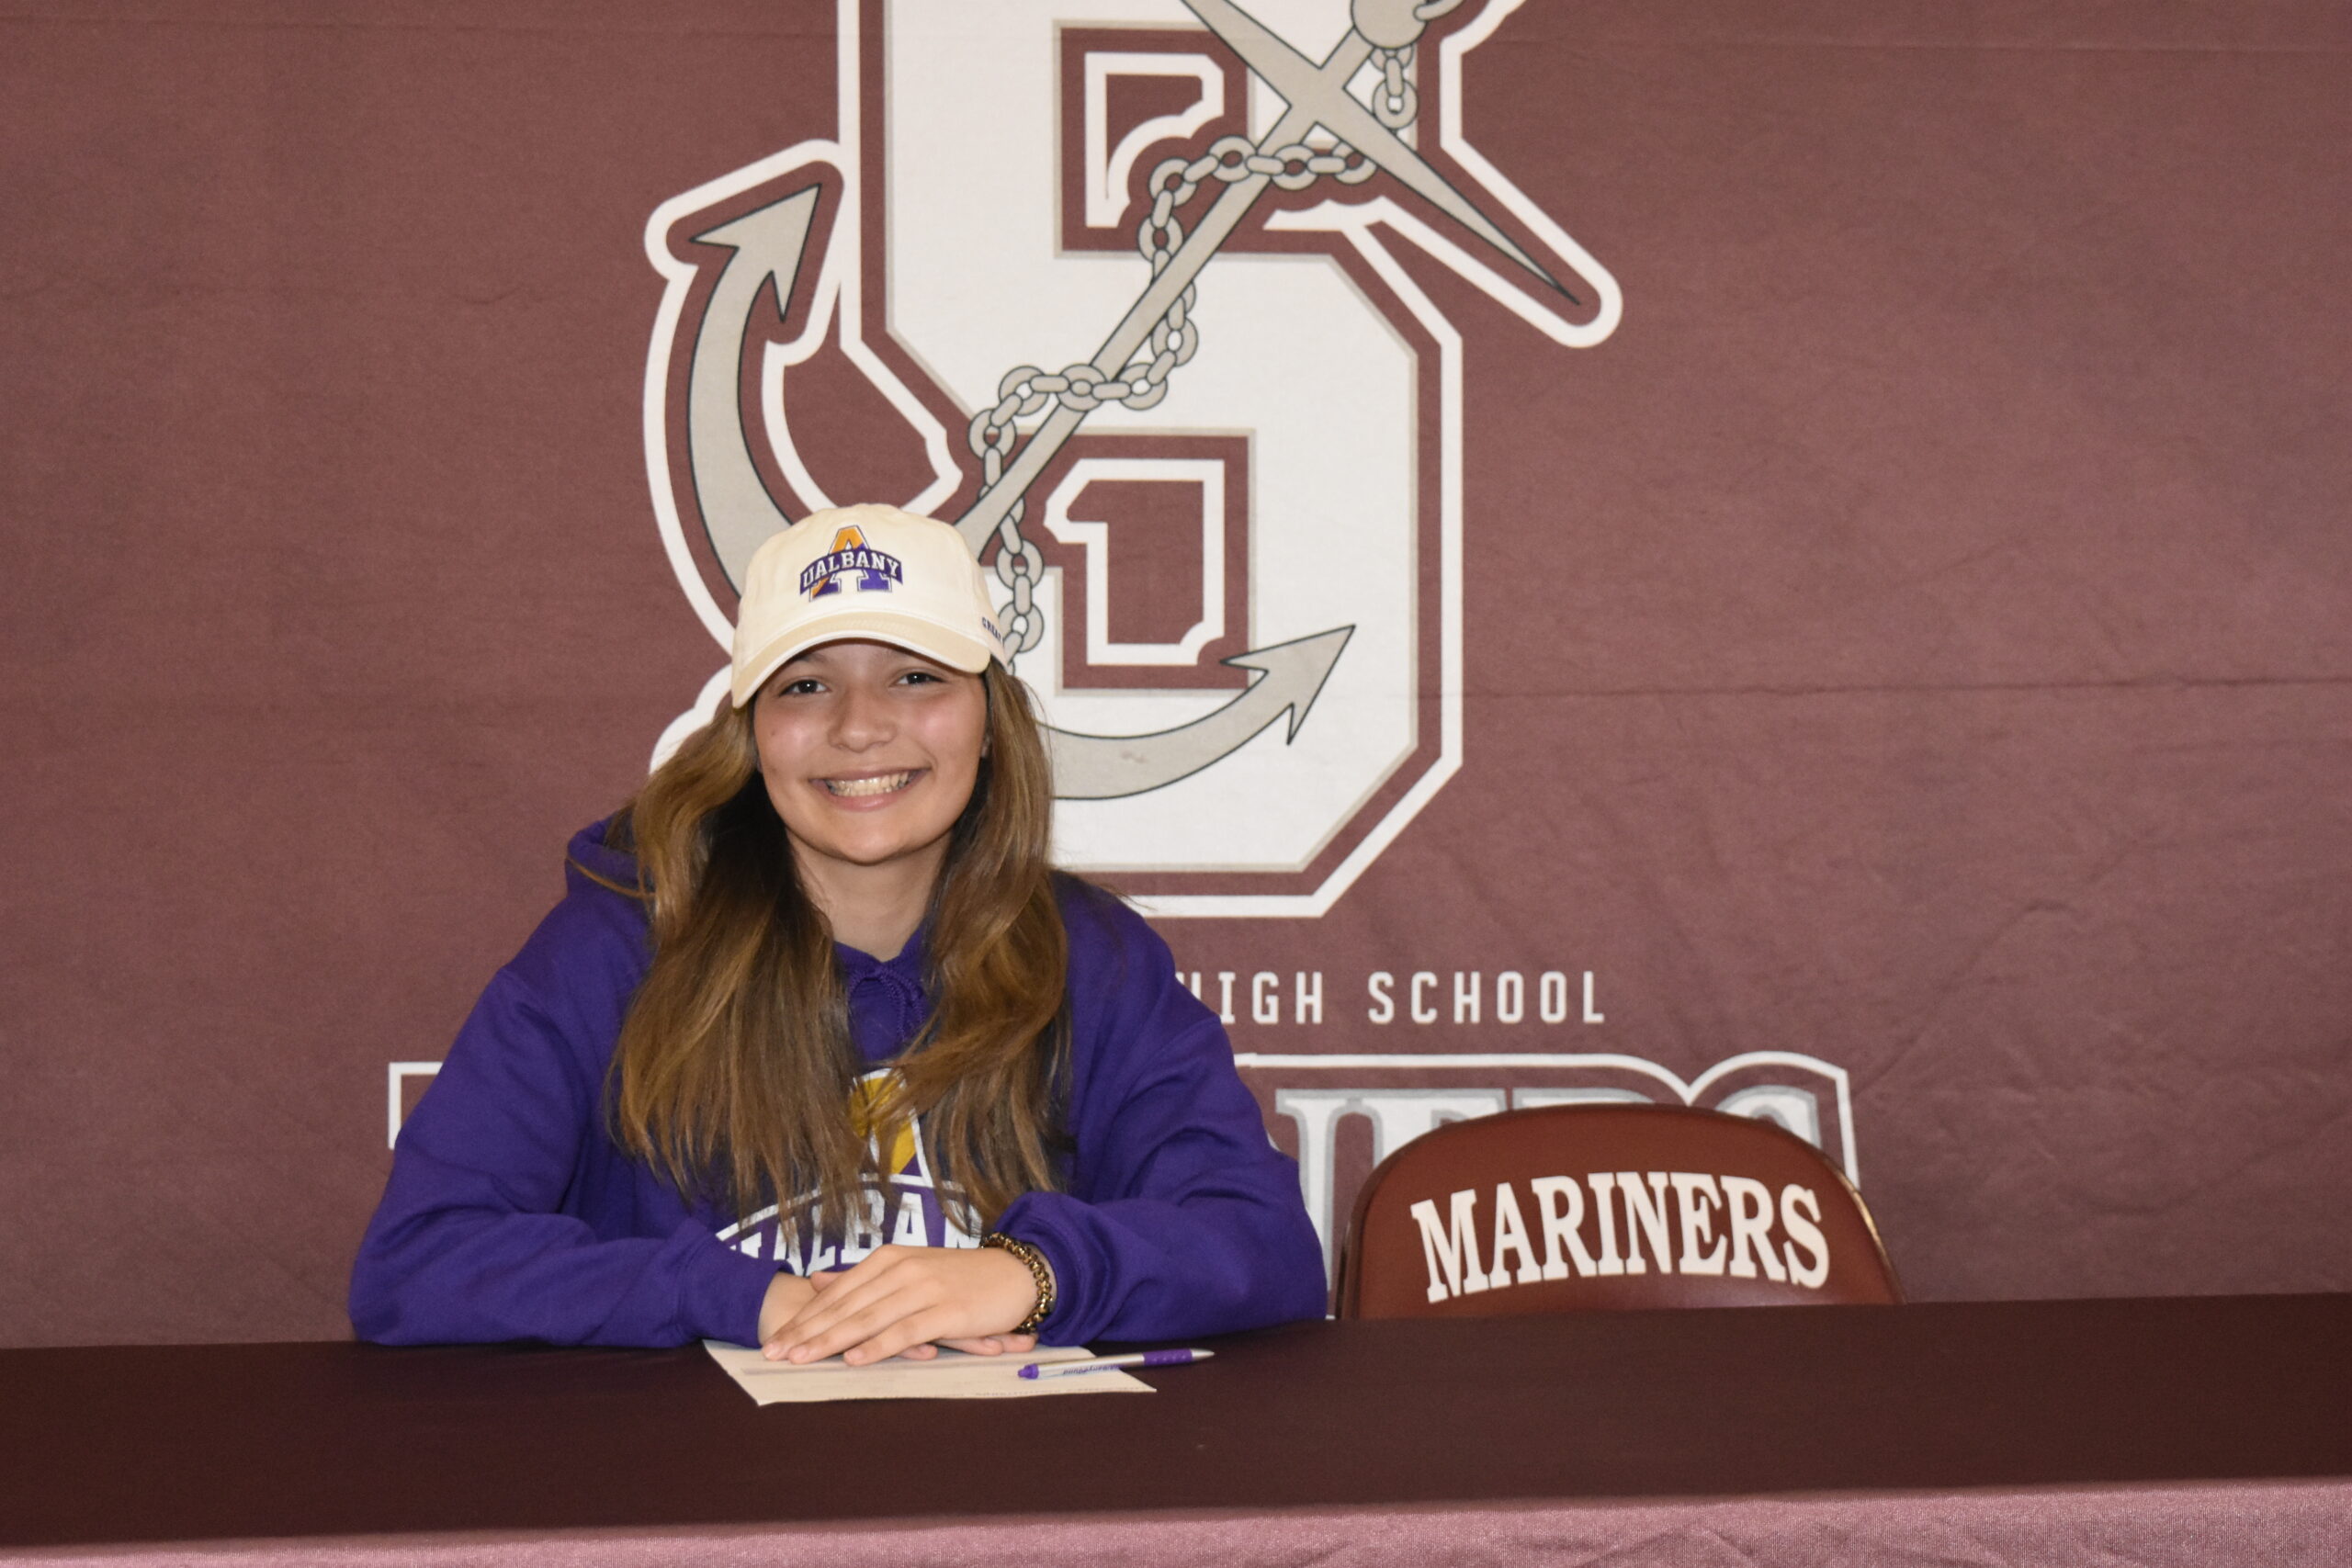 Gabriella Arnold of Southampton on the day she signed her letter of intent for the University of Albany. DREW BUDD